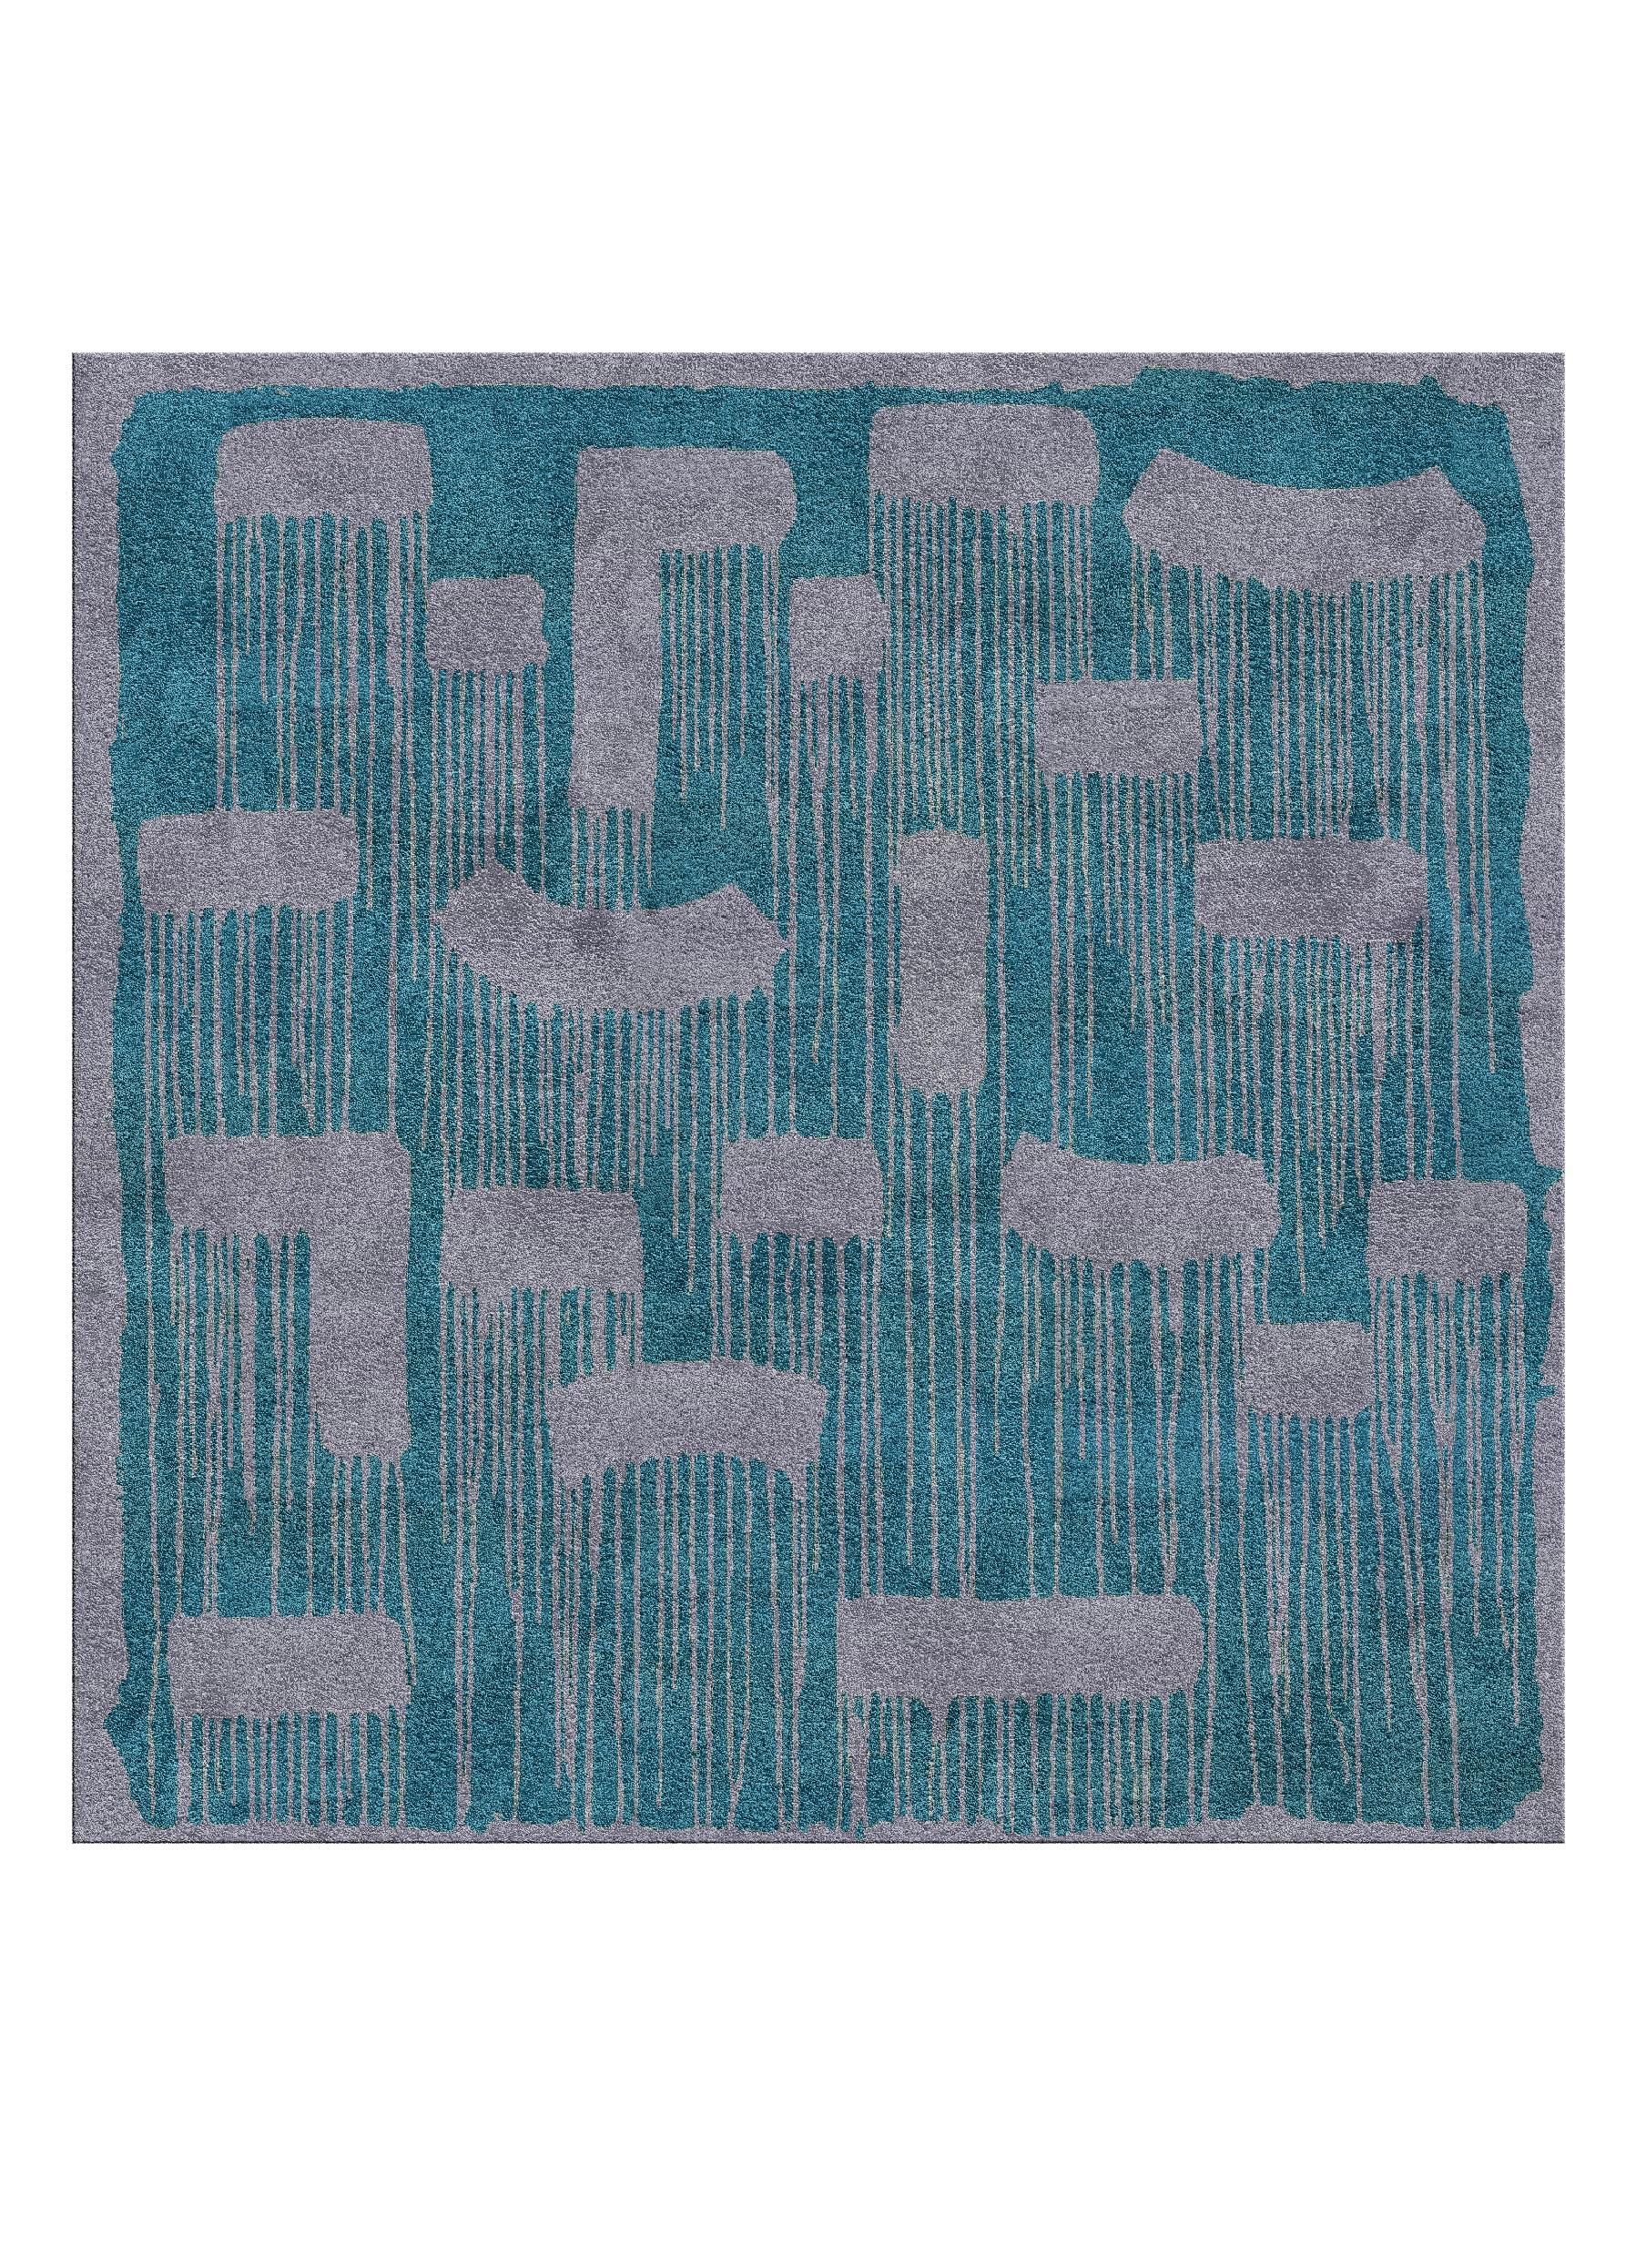 Drop rug II by Raul
Dimensions: D 200 x W 200 cm
Materials: viscose, linen
Available in other colors.

The Drop series takes inspiration from an artwork the Artist painted in Los Angeles, enchanted by the many colors and sparkles that lit the